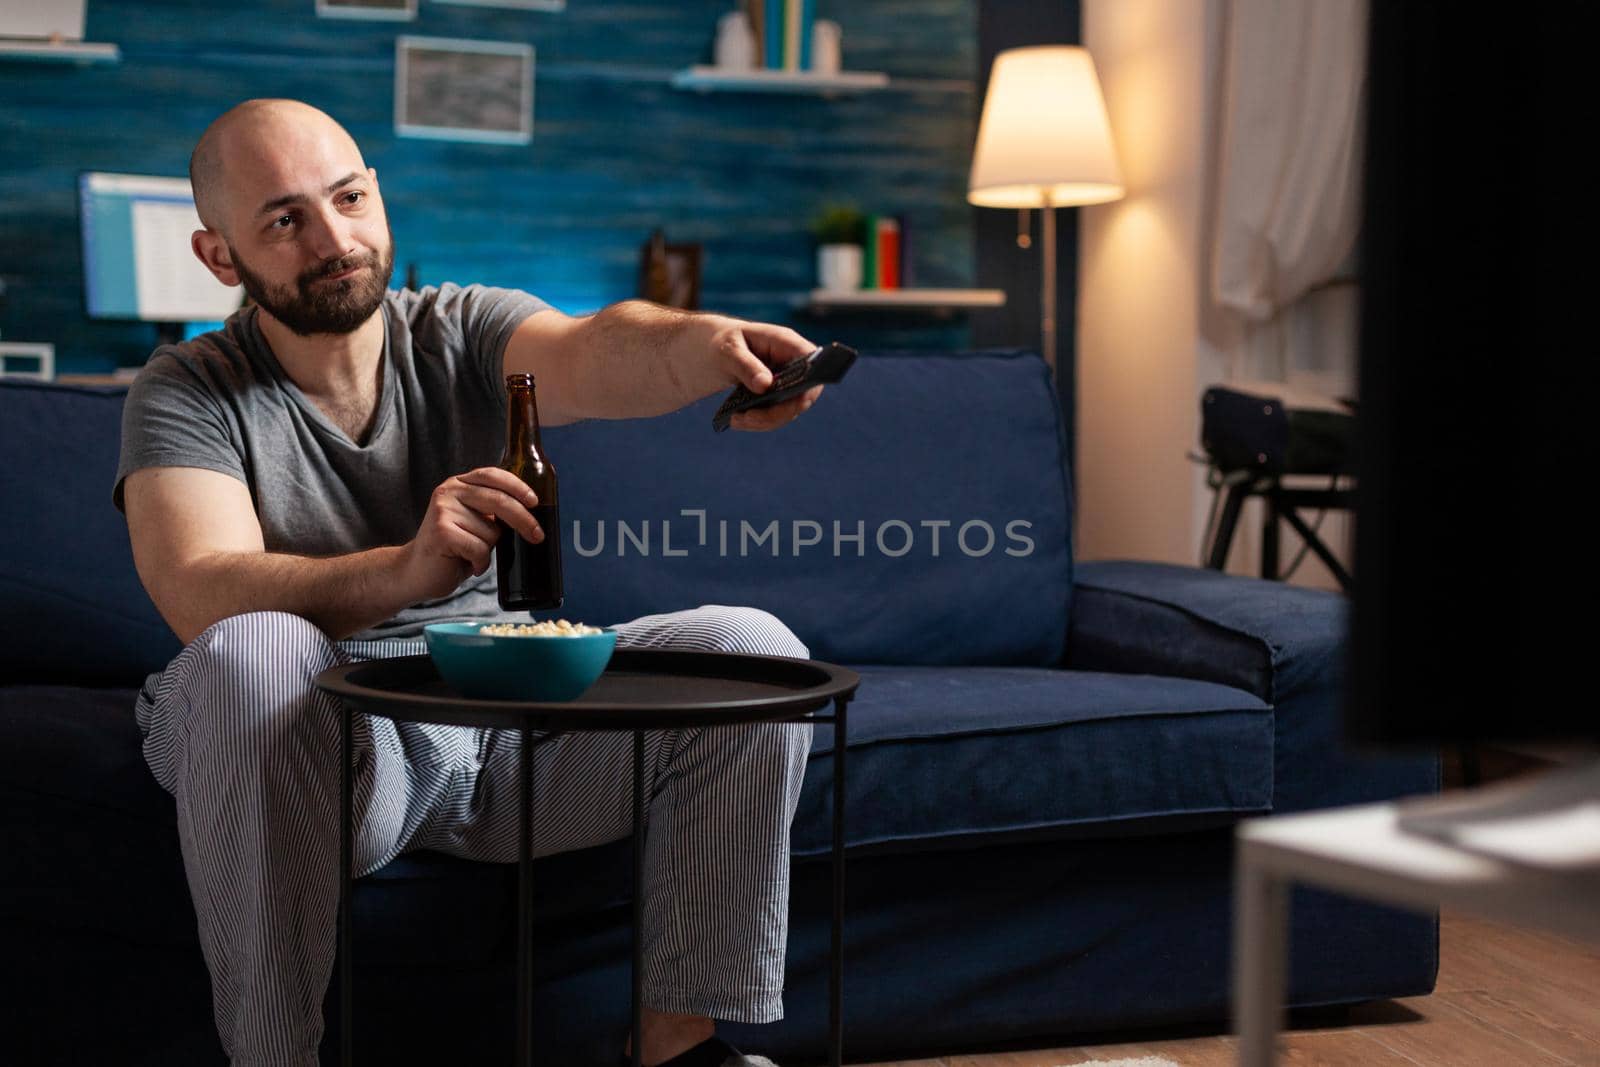 Excited relaxed man spending free time watching TV entertainment series eating popcorn and drinking beer. Funny amused enjoying evening at home sitting on comfortable couch dressed in pajamas